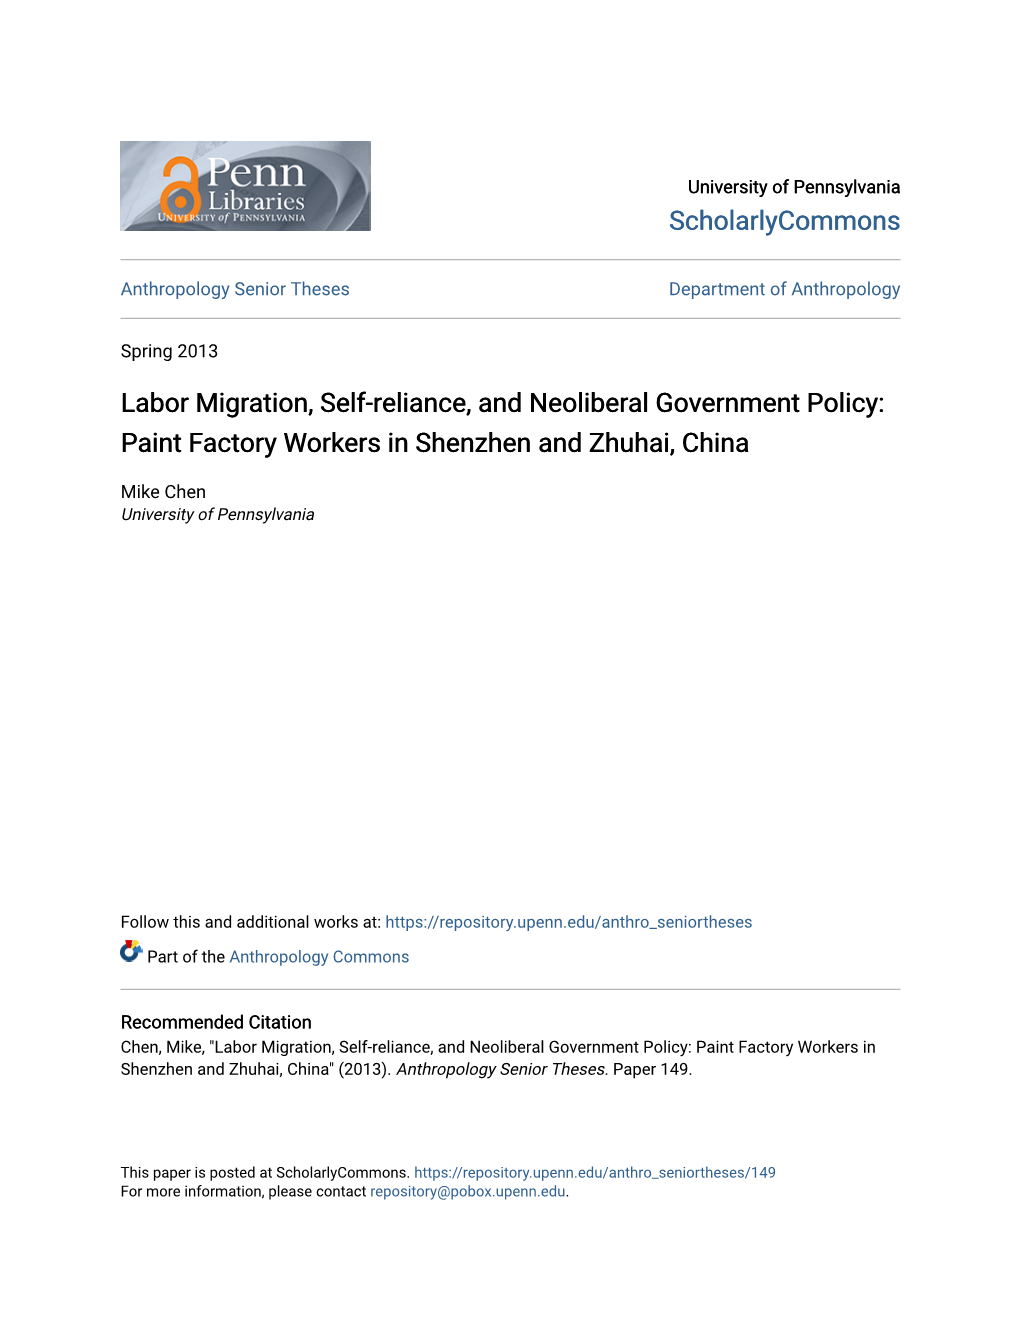 Labor Migration, Self-Reliance, and Neoliberal Government Policy: Paint Factory Workers in Shenzhen and Zhuhai, China